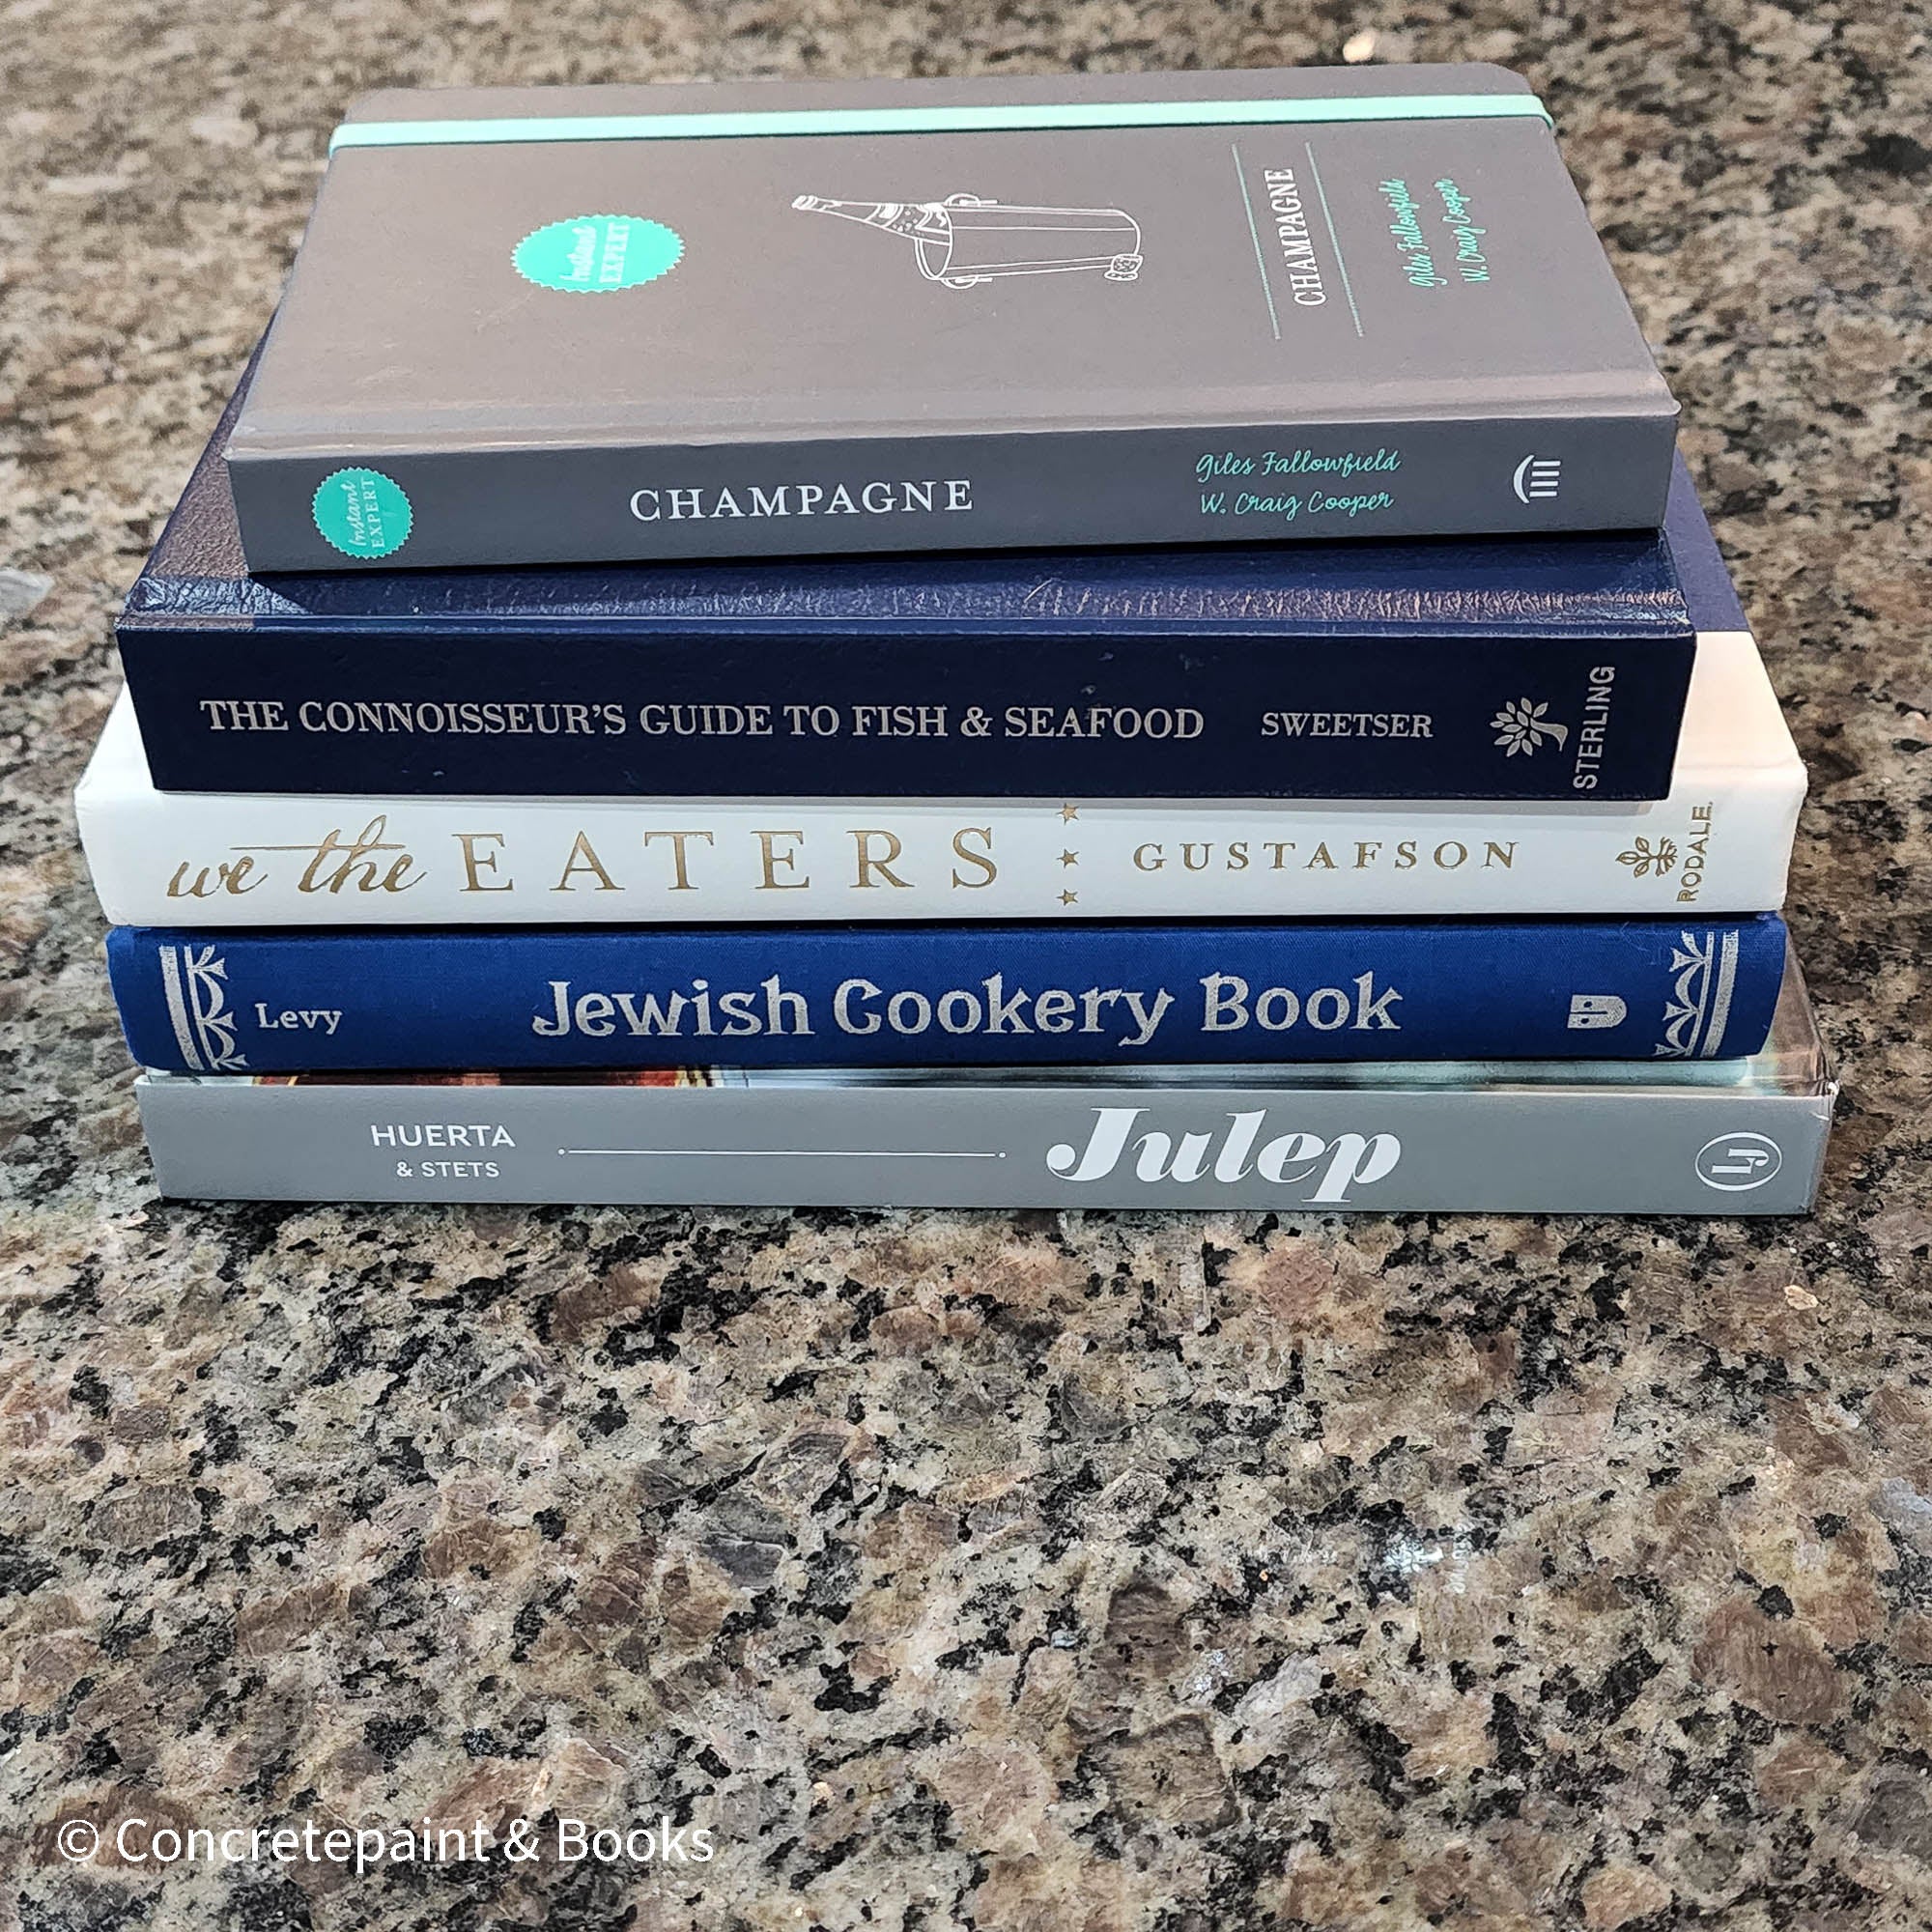 Diet and cookbooks for decoration and reading. Neutral, blue and gray kitchen or coffee table decoration.